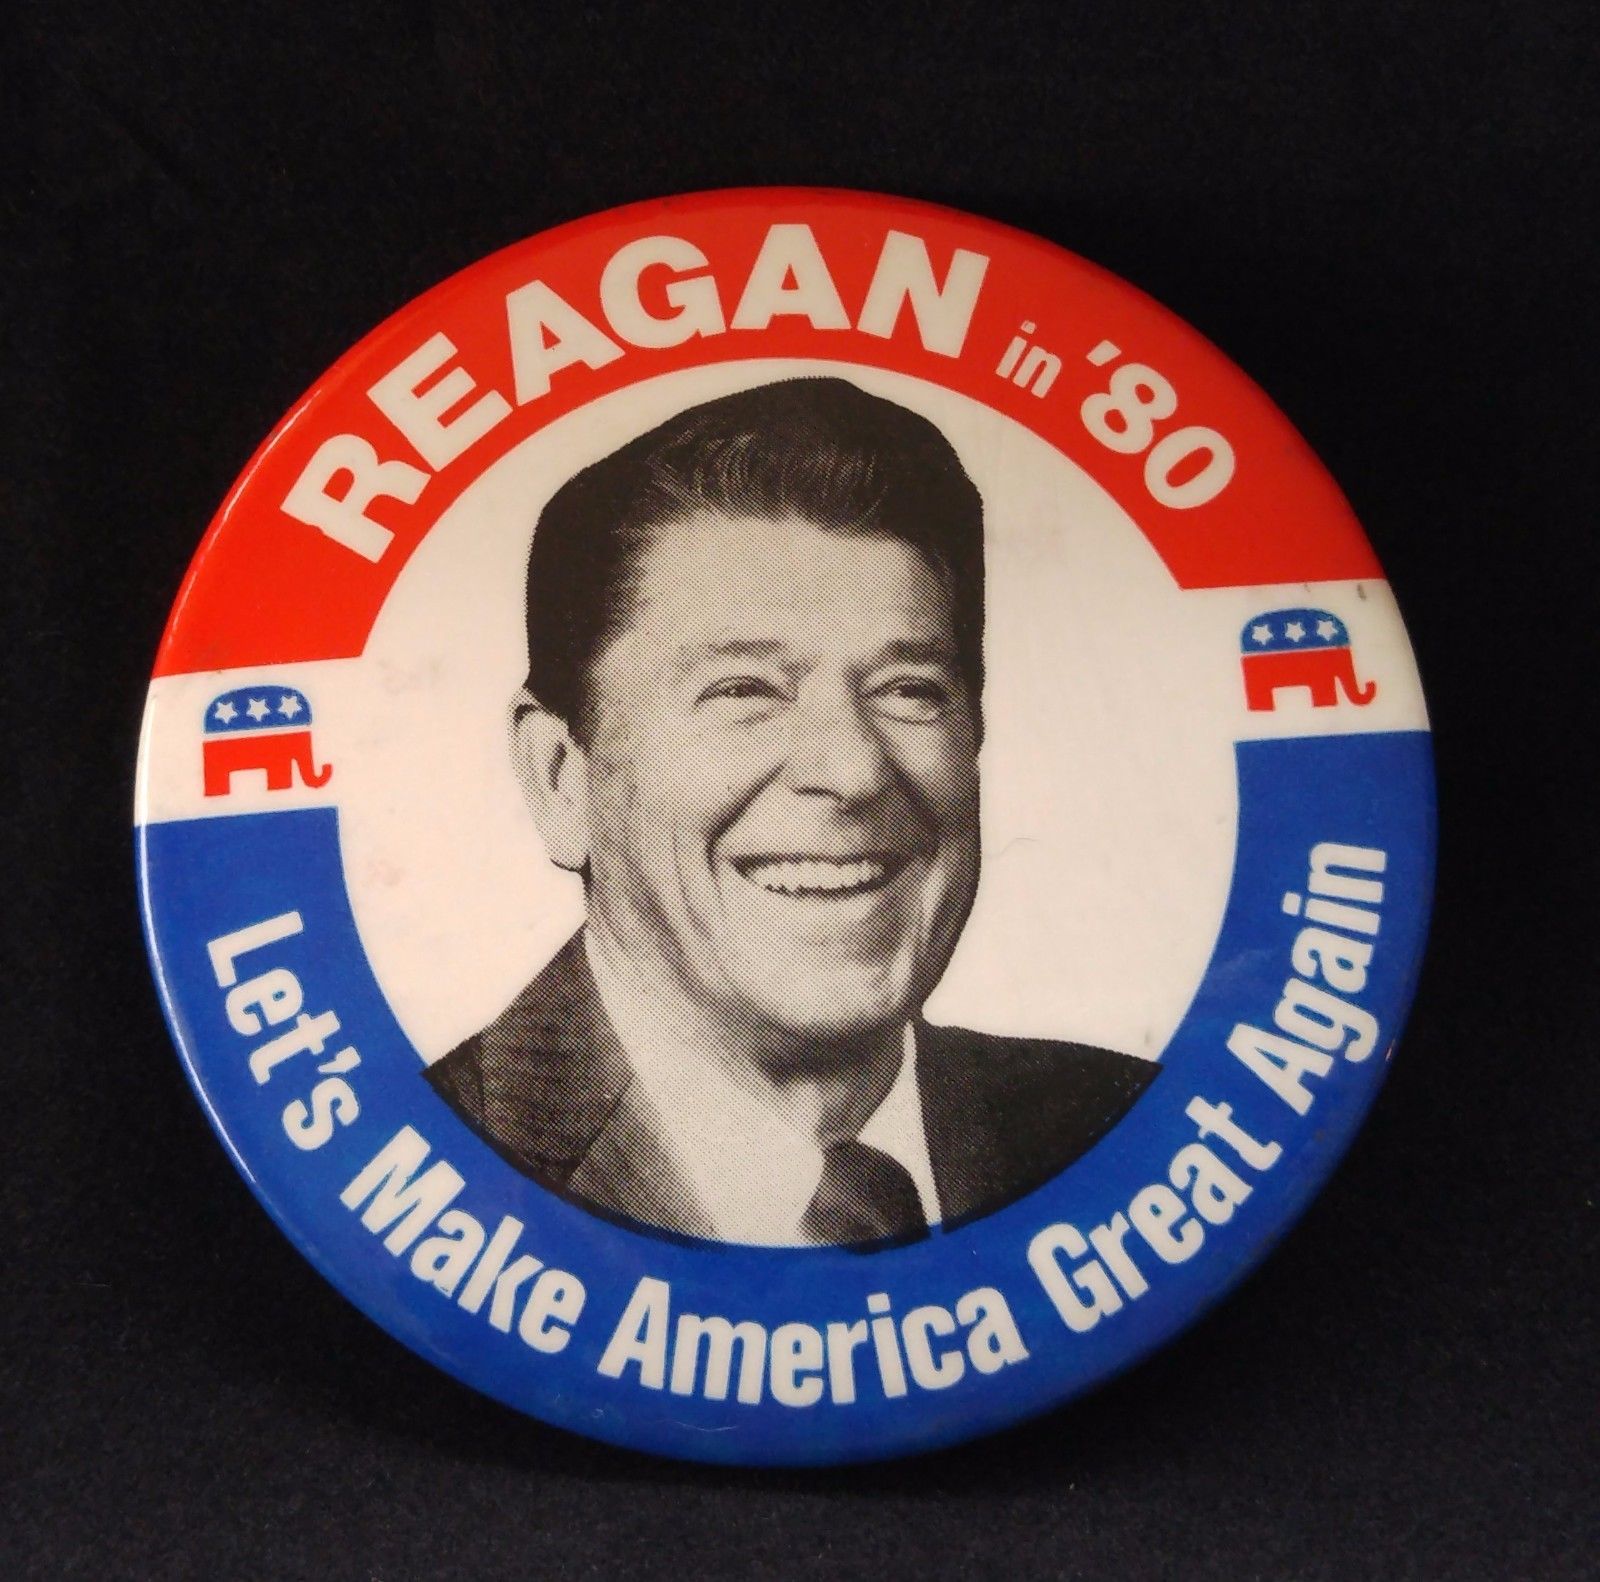 rare-facing-right-reagan-in-80-let-s-make-america-great-again-3-5-button-ddce082219fe0c5577dcc1990bc22898.jpg